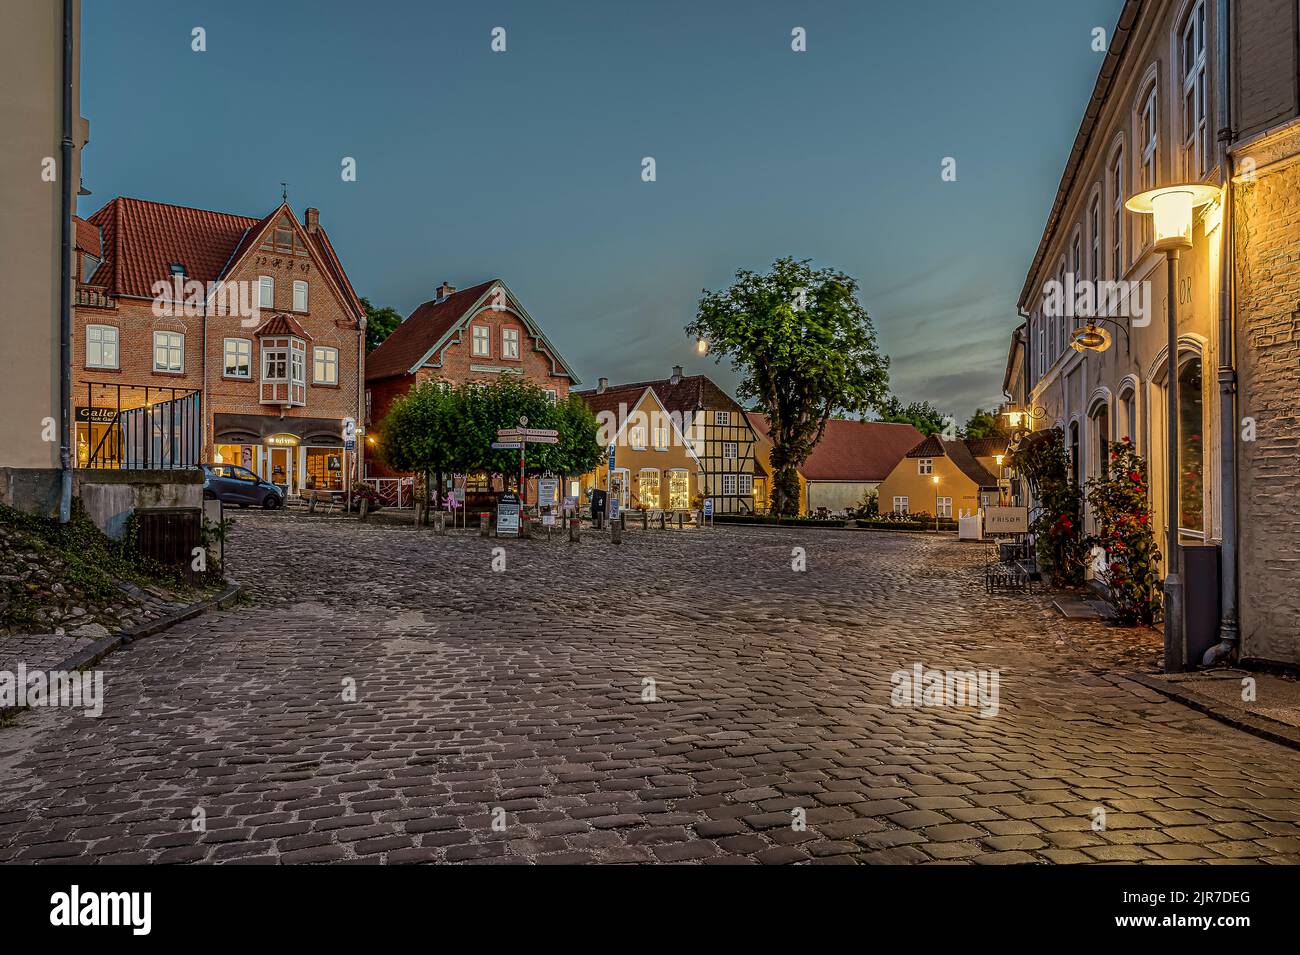 the illuminated square in the small Danish town of Mariager during the blue hour, Mariager, Denmark, August 5, 2022 Stock Photo